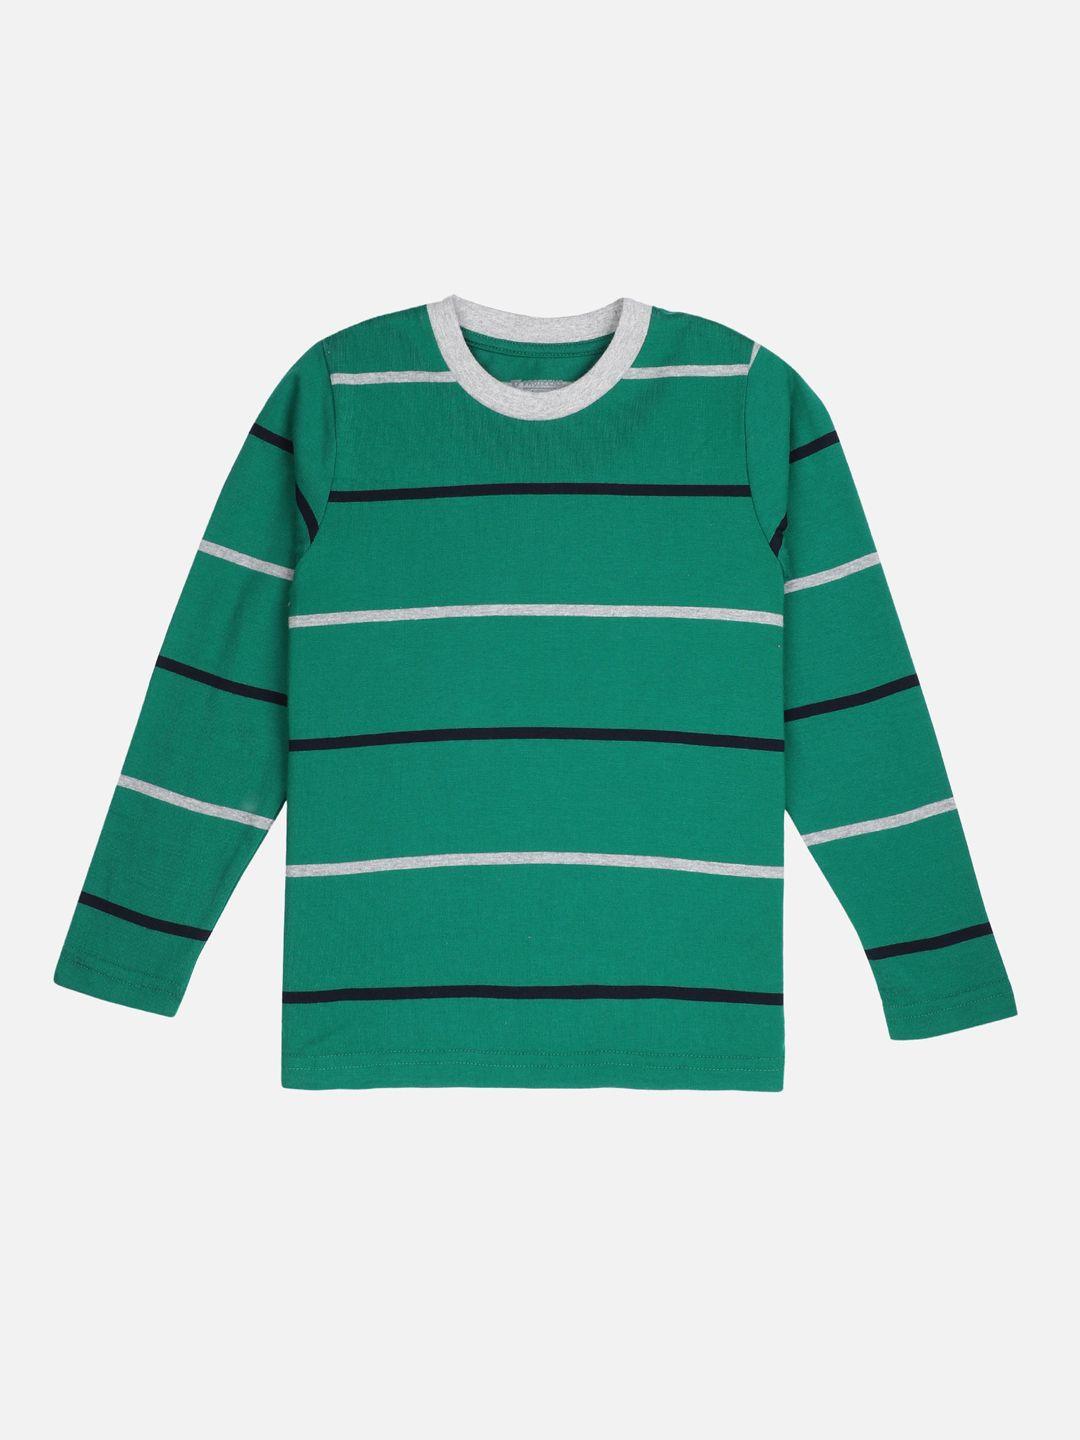 proteens boys green & white striped round neck t-shirt